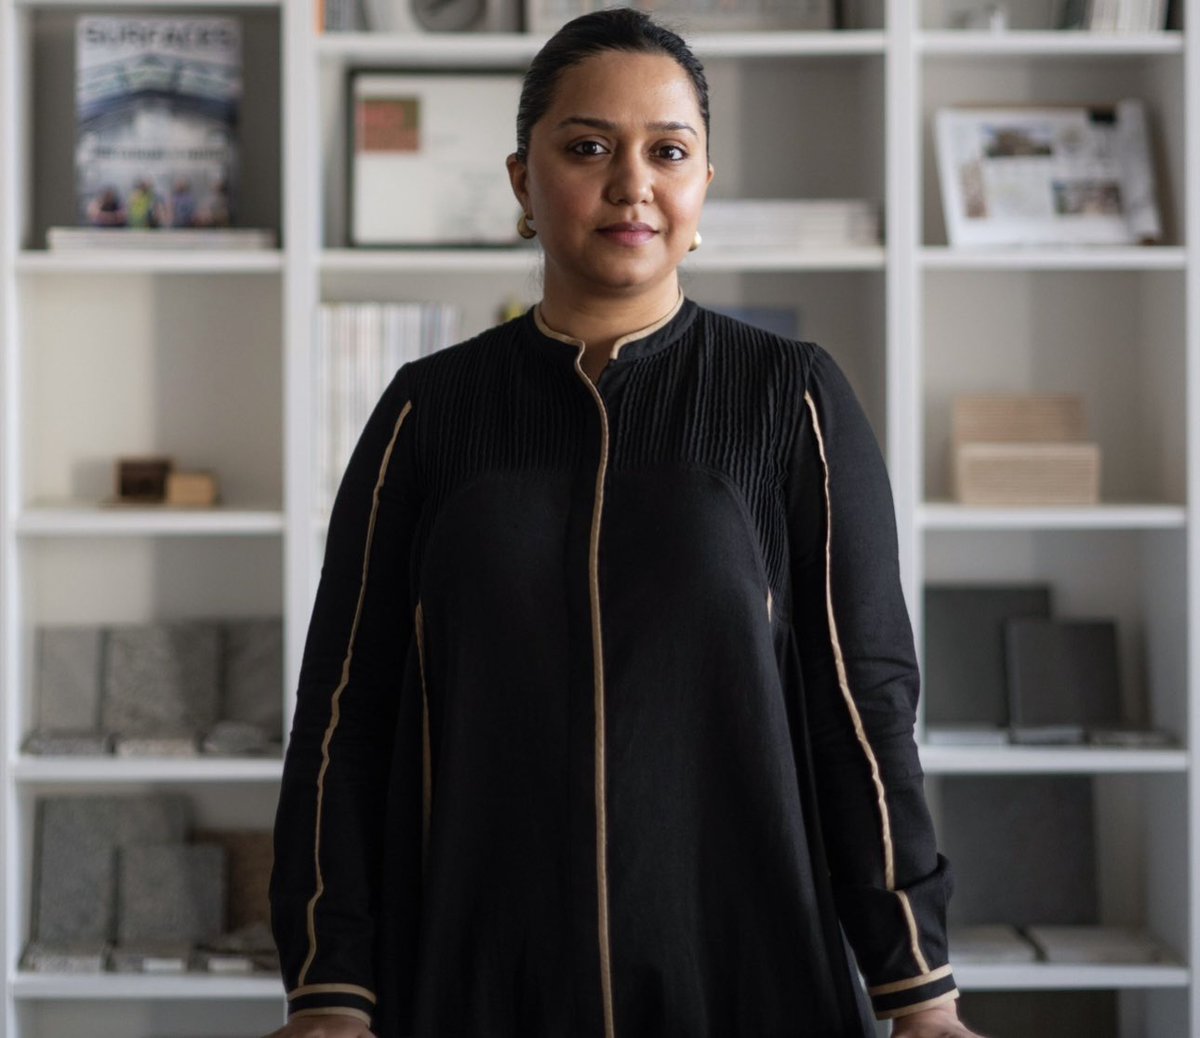 Crafting connections and exploring architectural harmony - Interview with Roshni Kshirsagar, Partner at SJK Architects✨

Read More- commercialdesignindia.com

#officeinspiration #theoffice #officegoals #officestyle #workplacegoals #workplacedesig #officegoals #officedesk